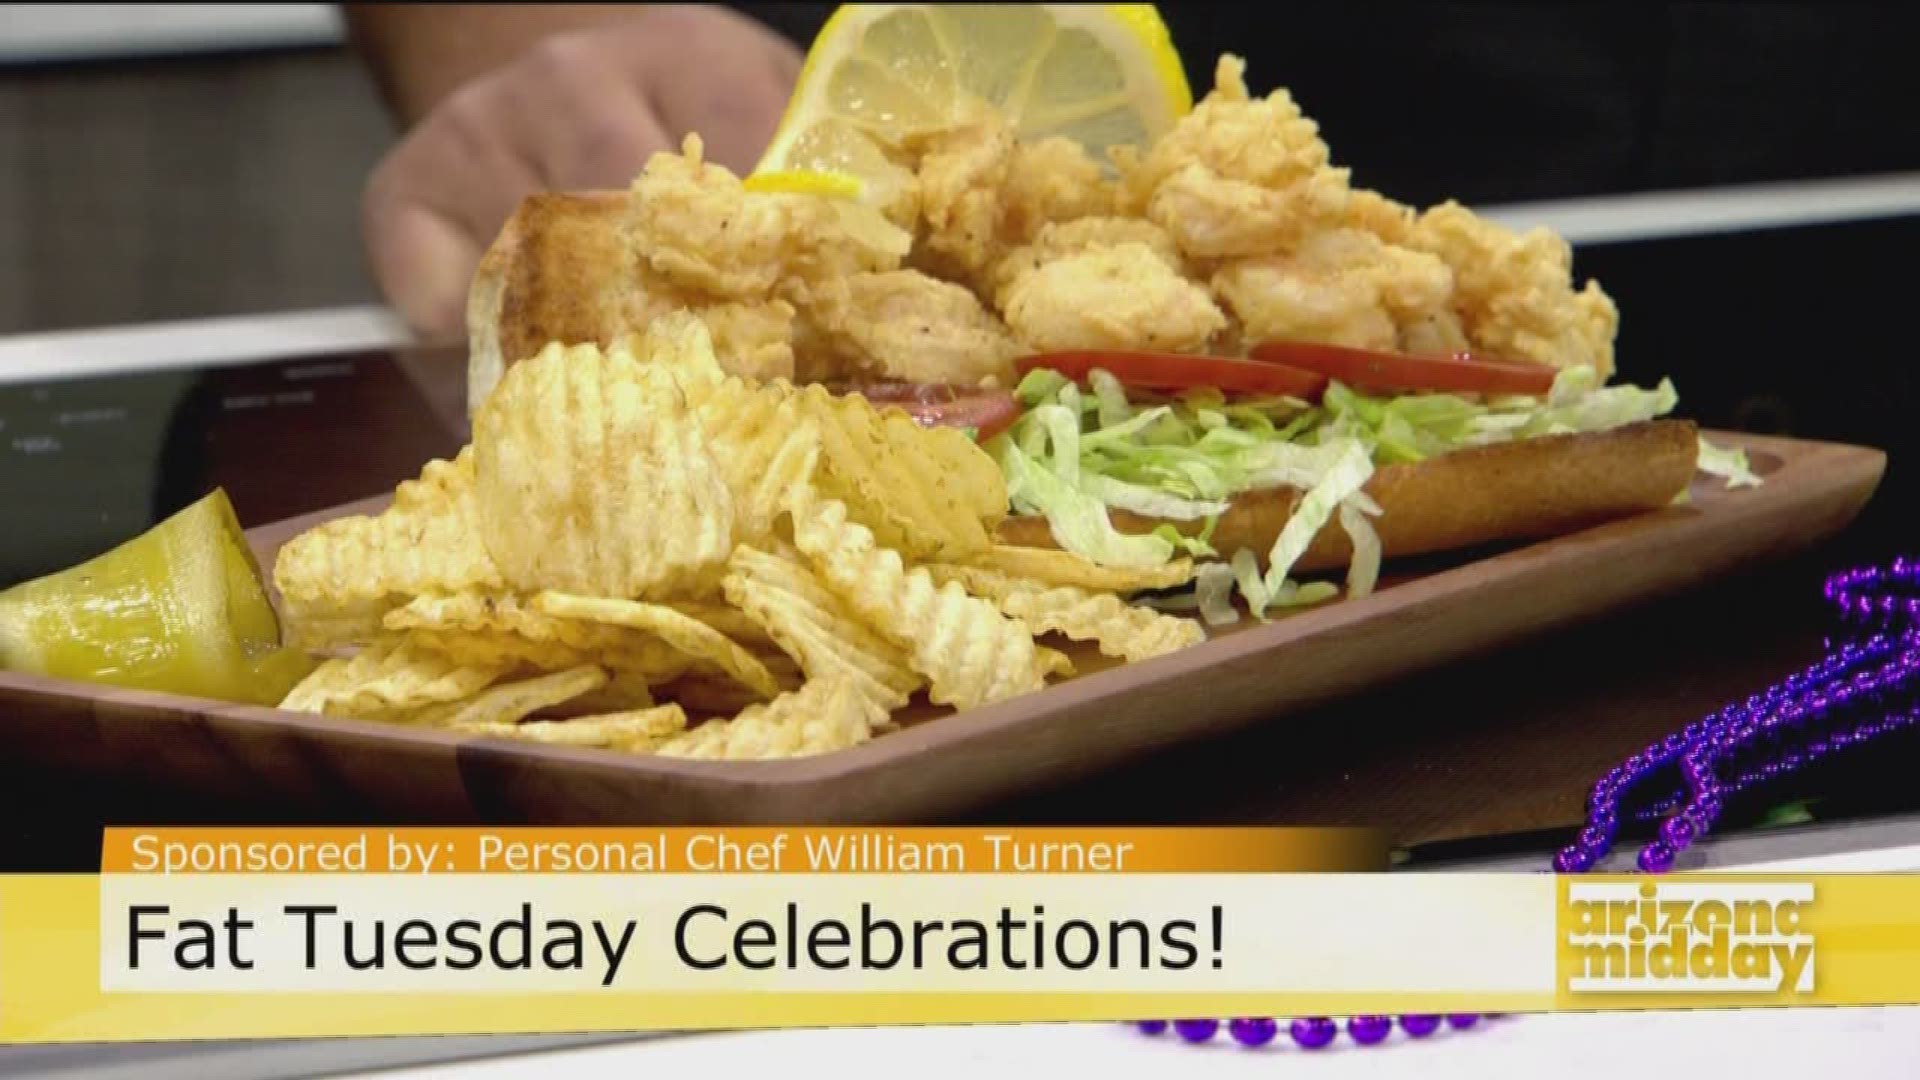 Chef William Turner shows us how to make a Shrimp Po Boy and we take a bite out of a King Cake!